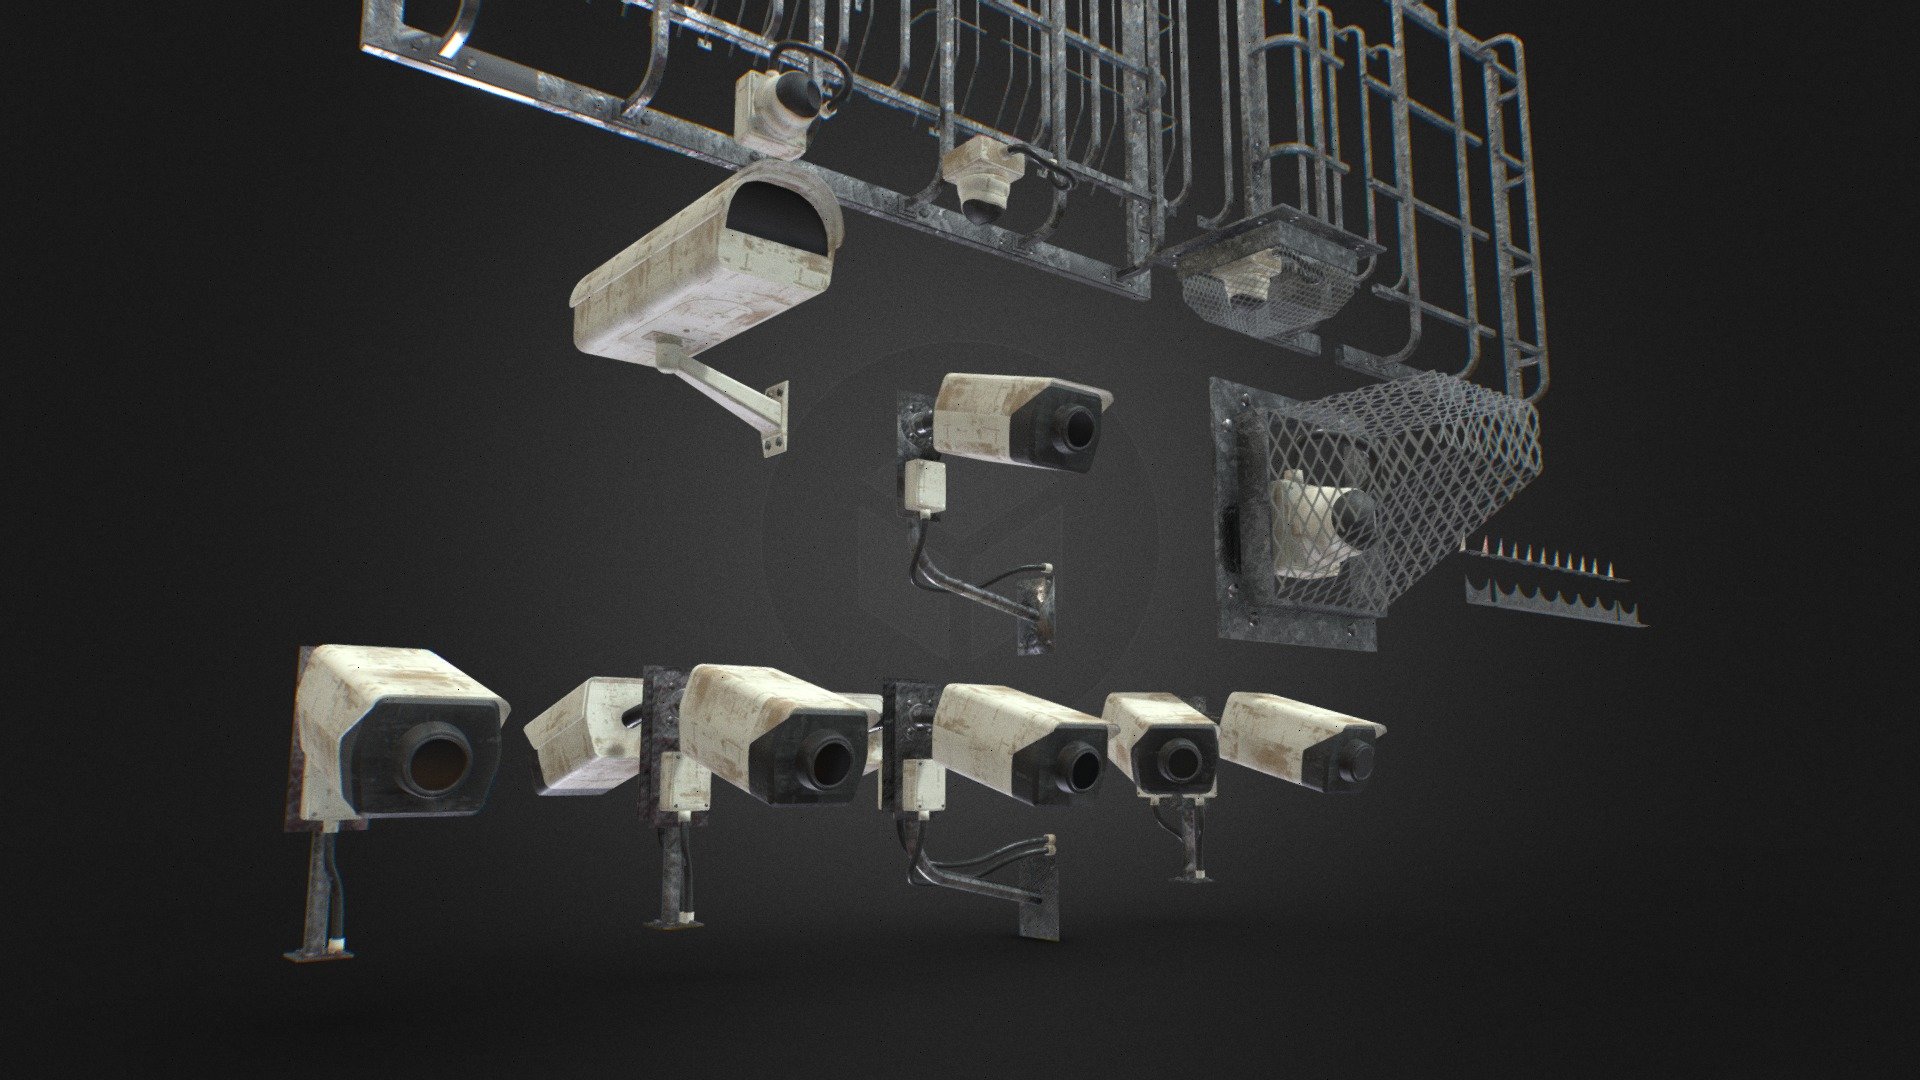 Security CCTV  Cameras Burglar bars Cages.

security camera and burglar or anti theft bars or cages for high crime areas - Security CCTV  Cameras Burglar bars Cages - Buy Royalty Free 3D model by 3D Content Online (@hknoblauch) 3d model